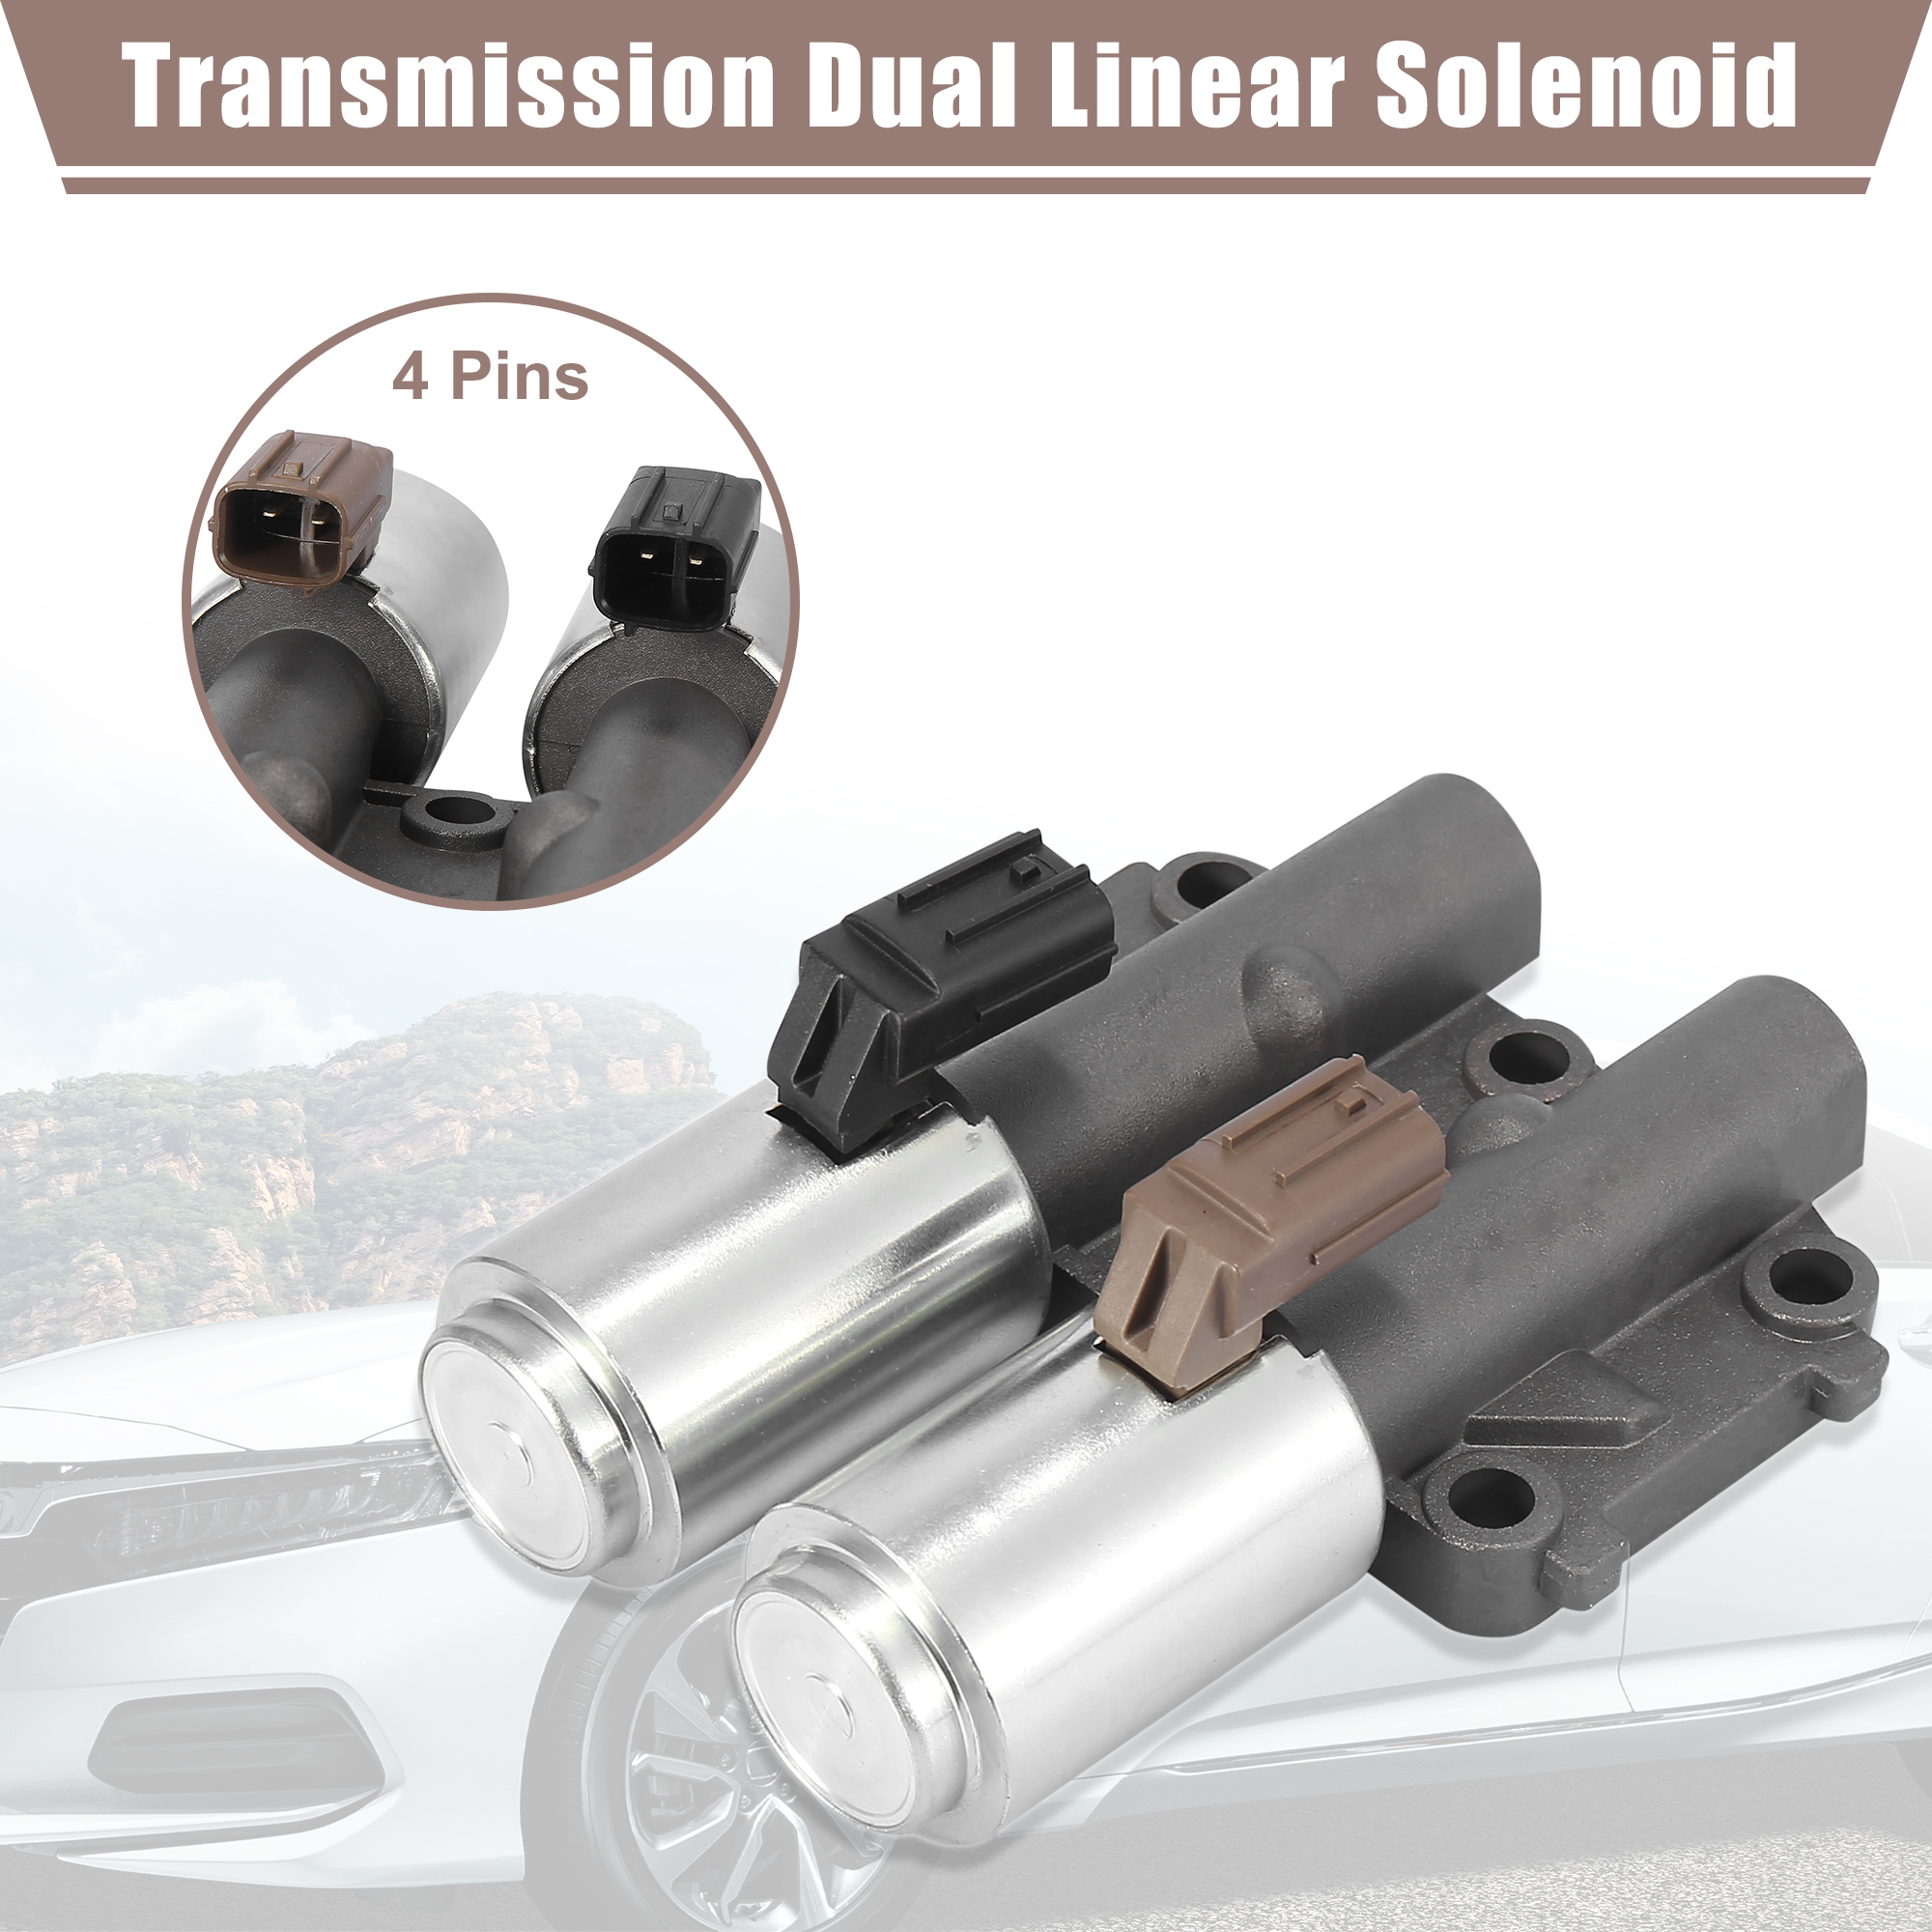 Unique Bargains Transmission Dual Linear Solenoid Valve for Honda Accord CR-V for Acura TSX RSX